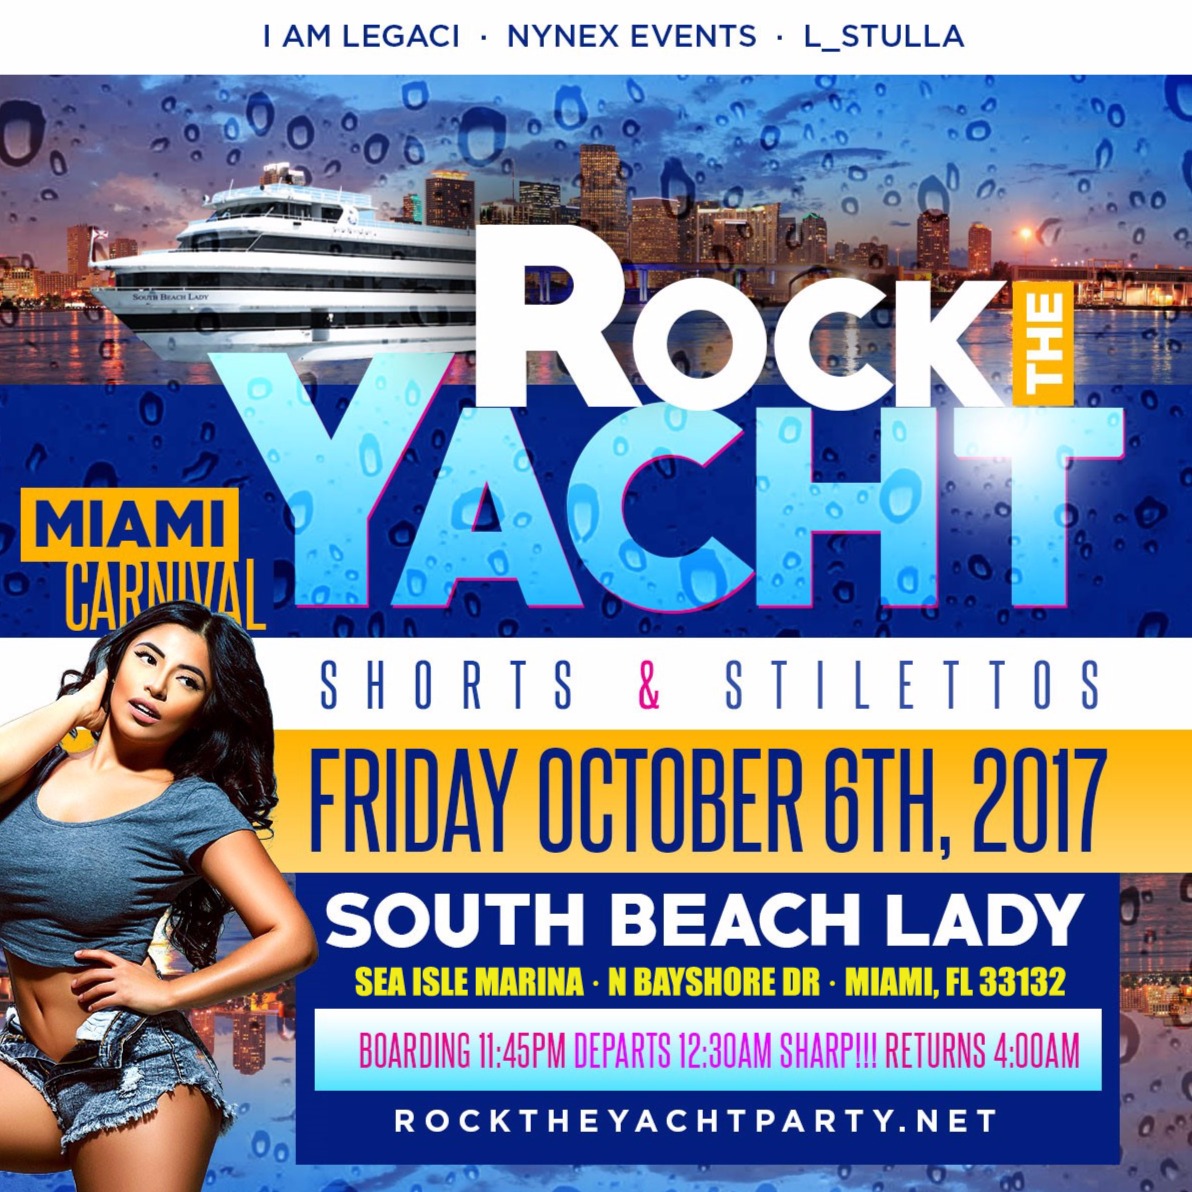 ROCK THE YACHT Shorts and Stilettos Edition Miami Carnival 2017 Yacht Party - Columbus Day Weekend